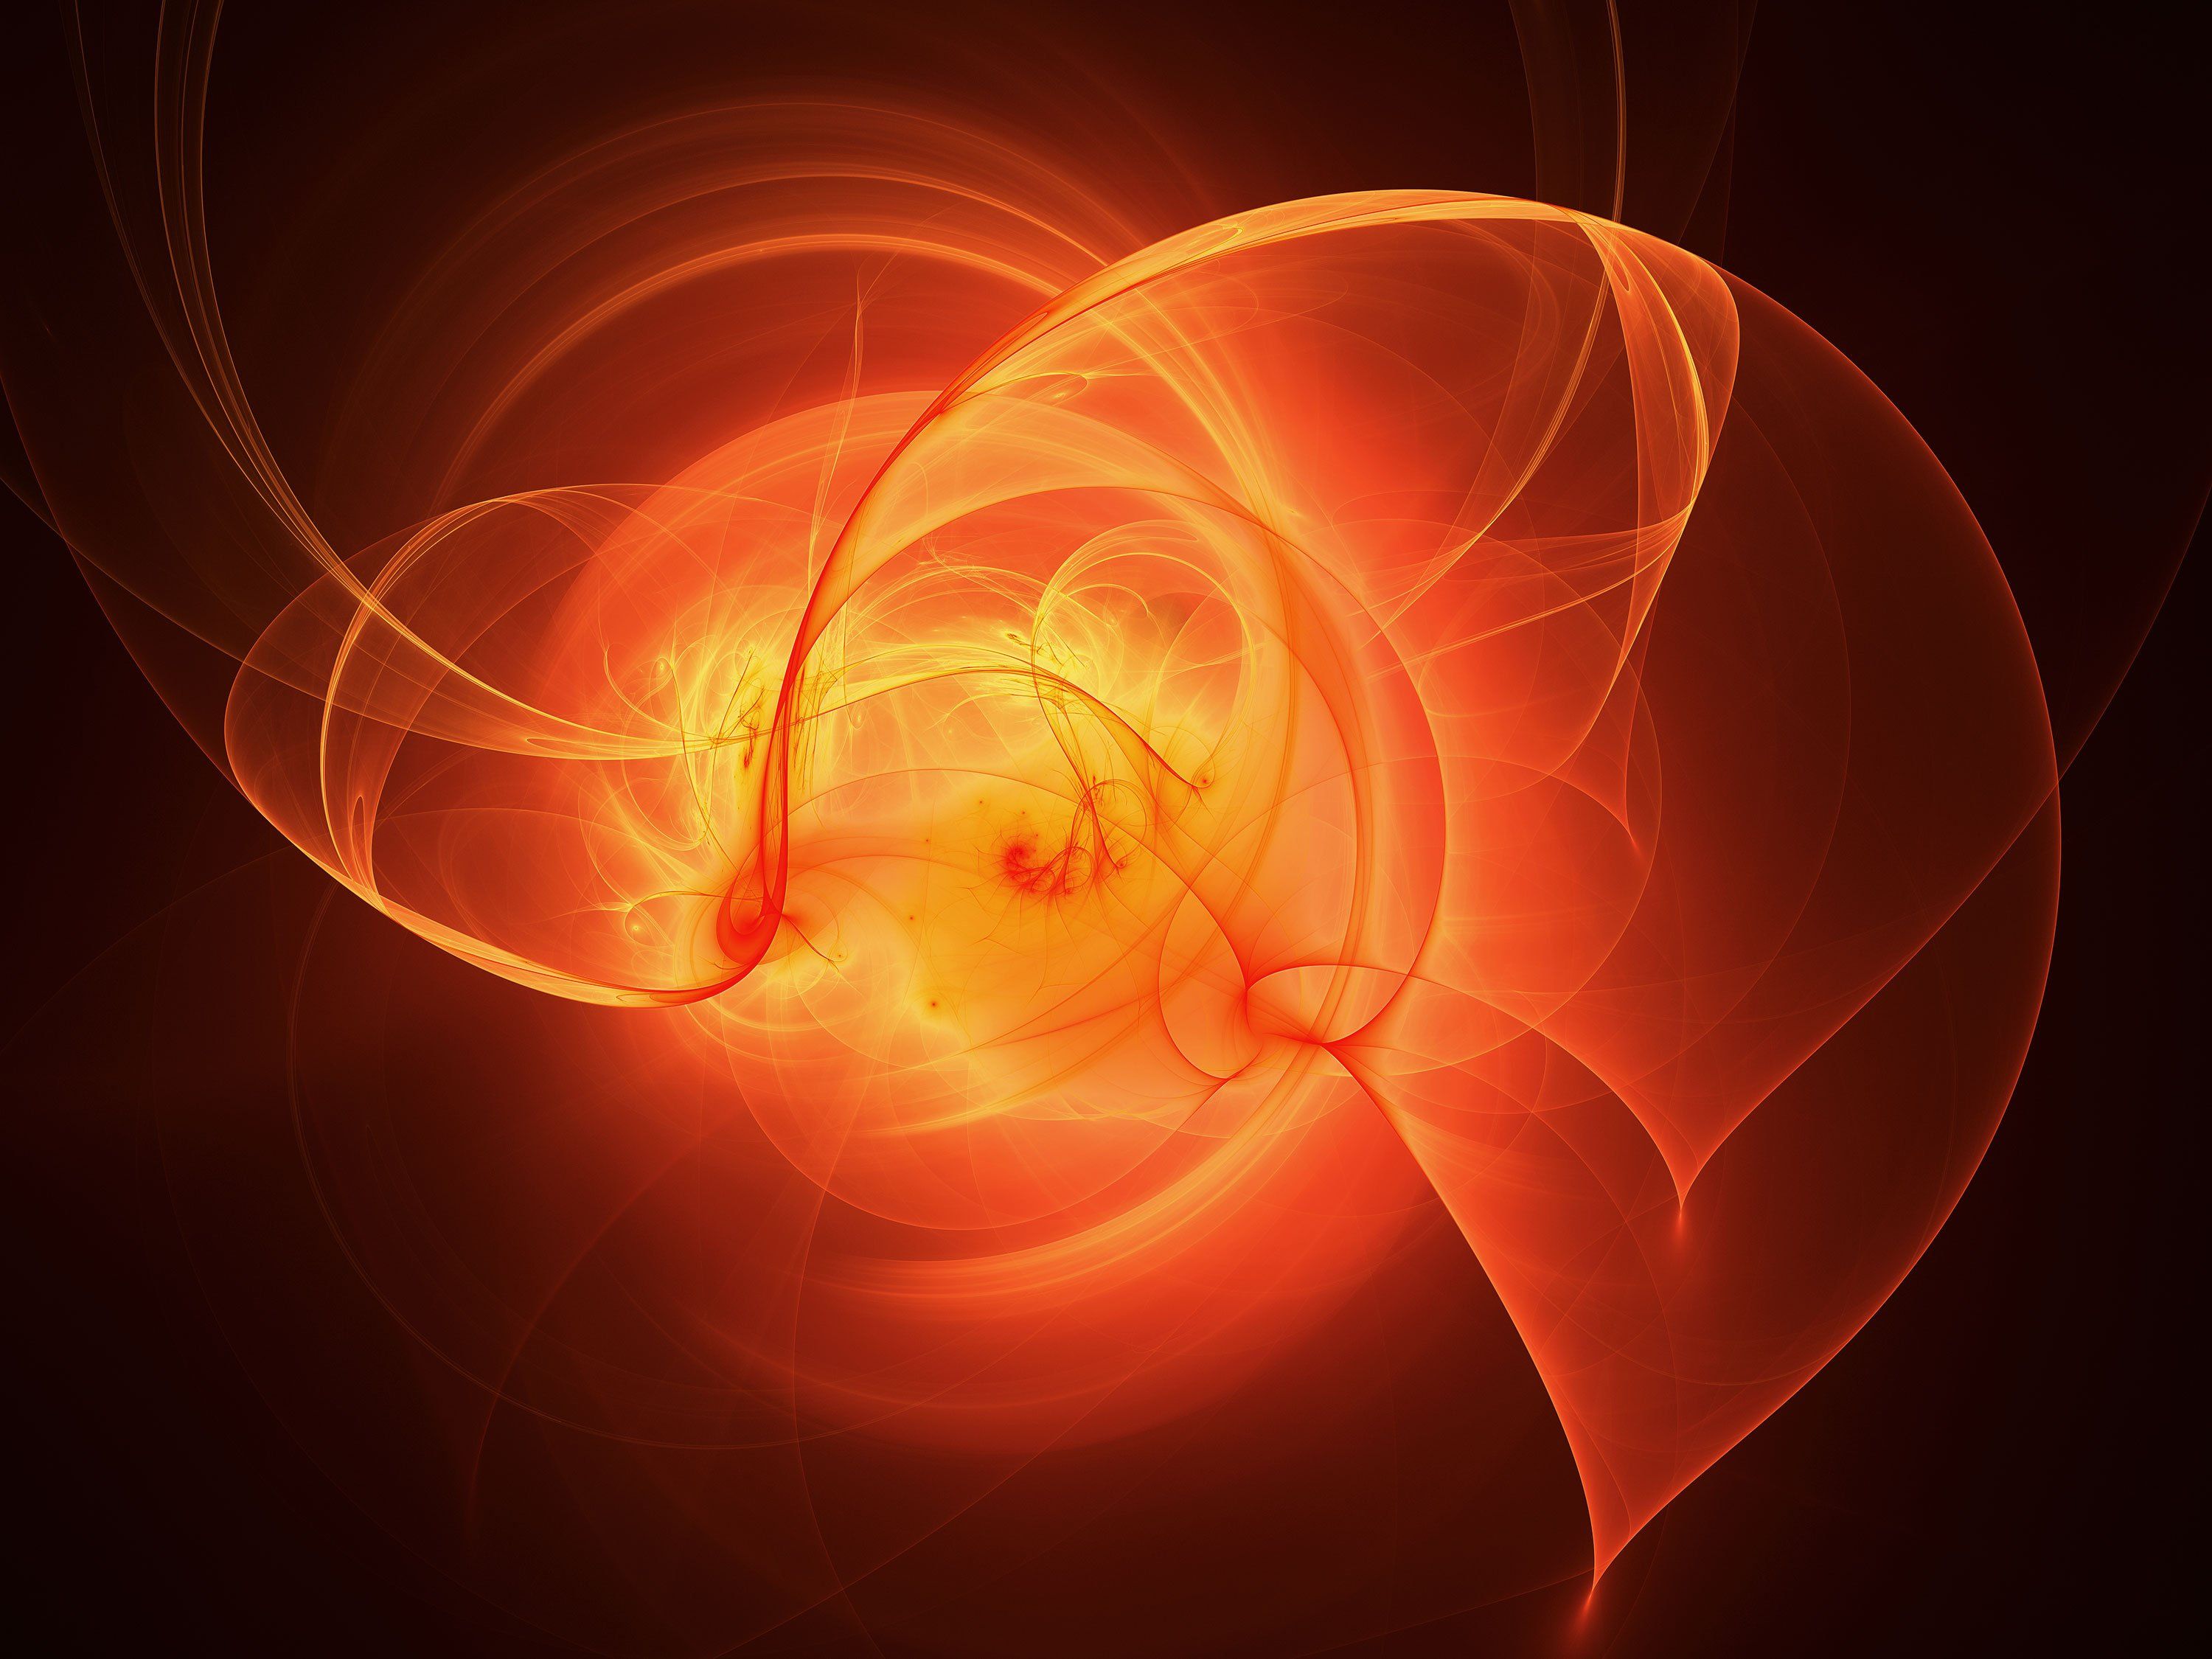 gassy swirl of orange and red against a dark background